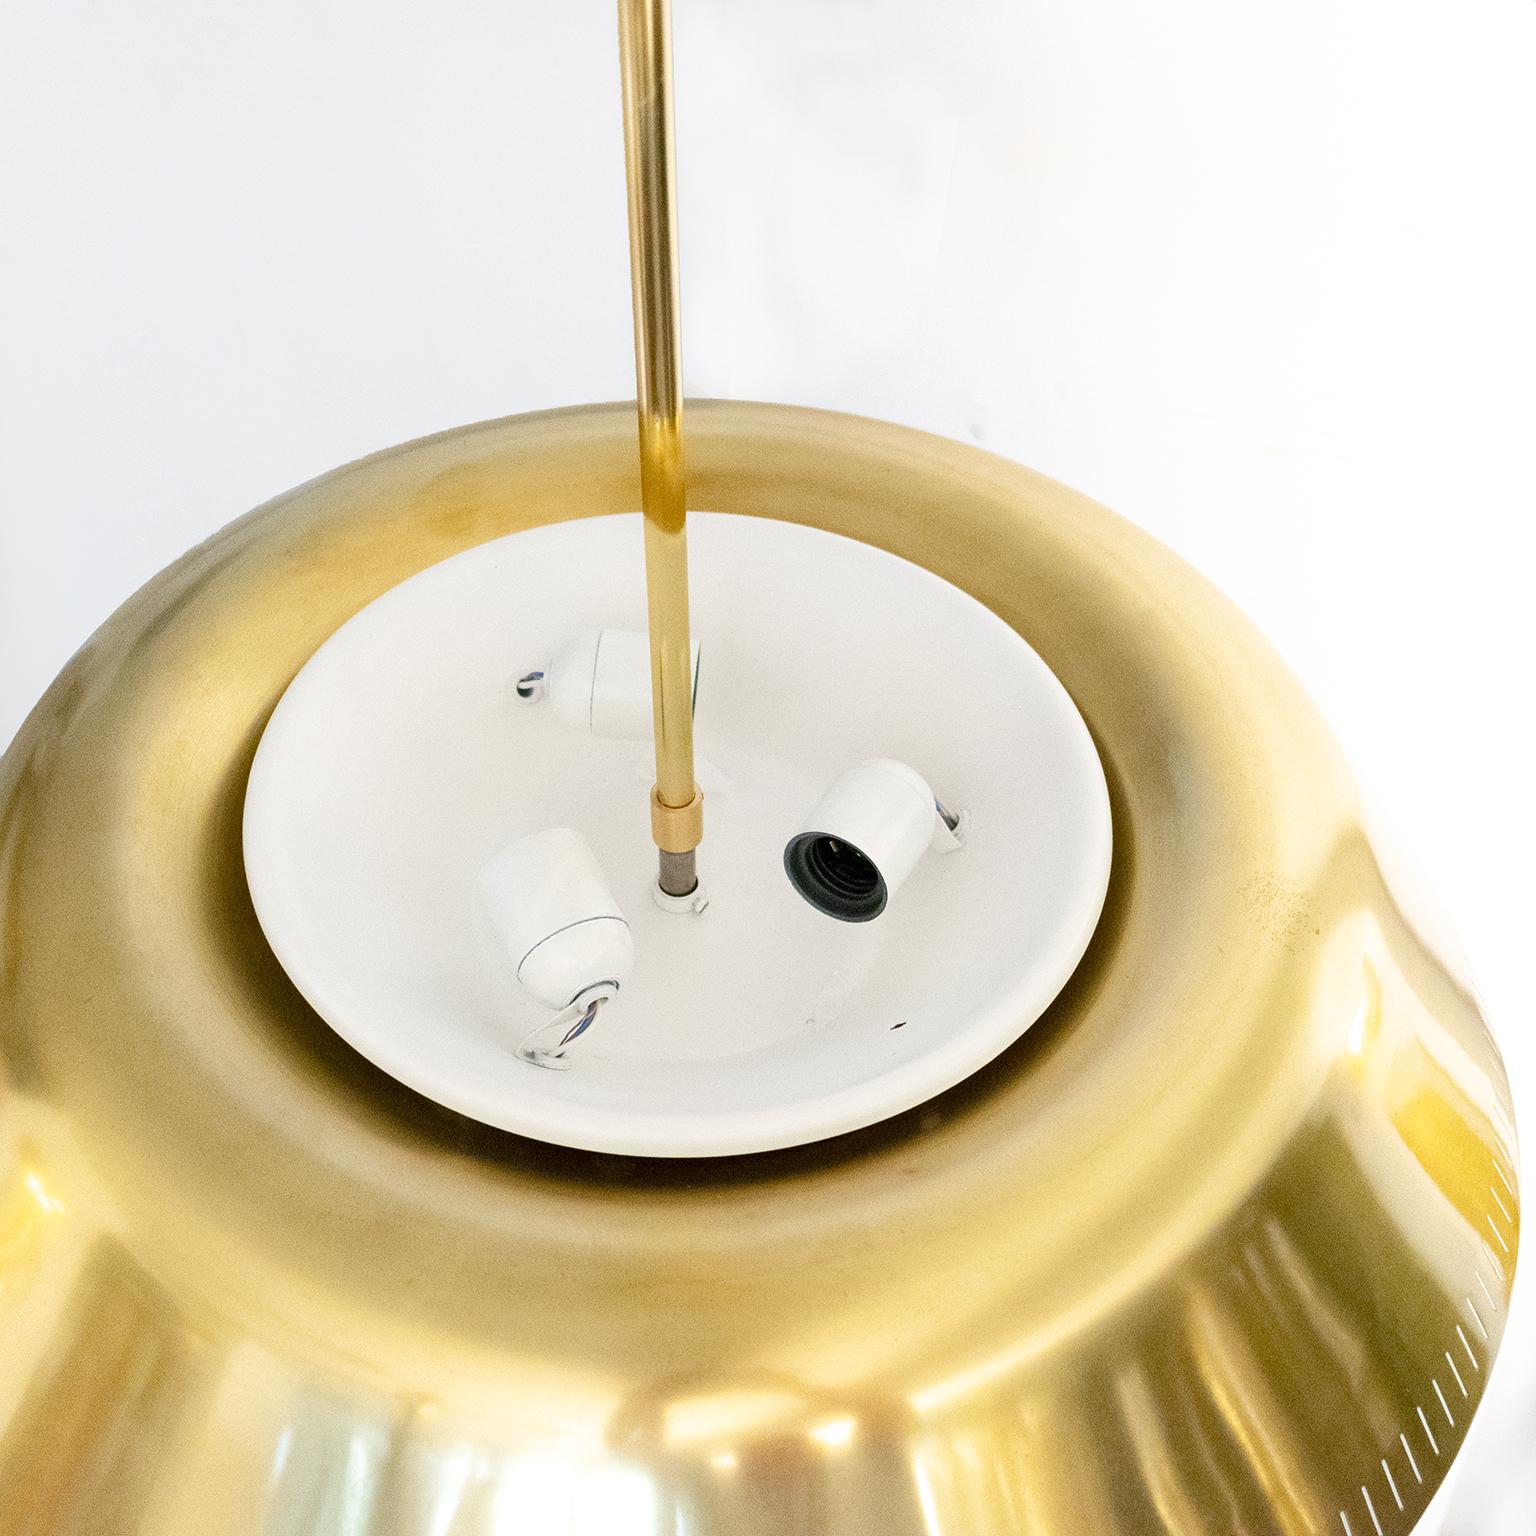 20th Century Scandinavian Brass Pendant by Harald Notini for Böhlmarks, Sweden with 9 sockets